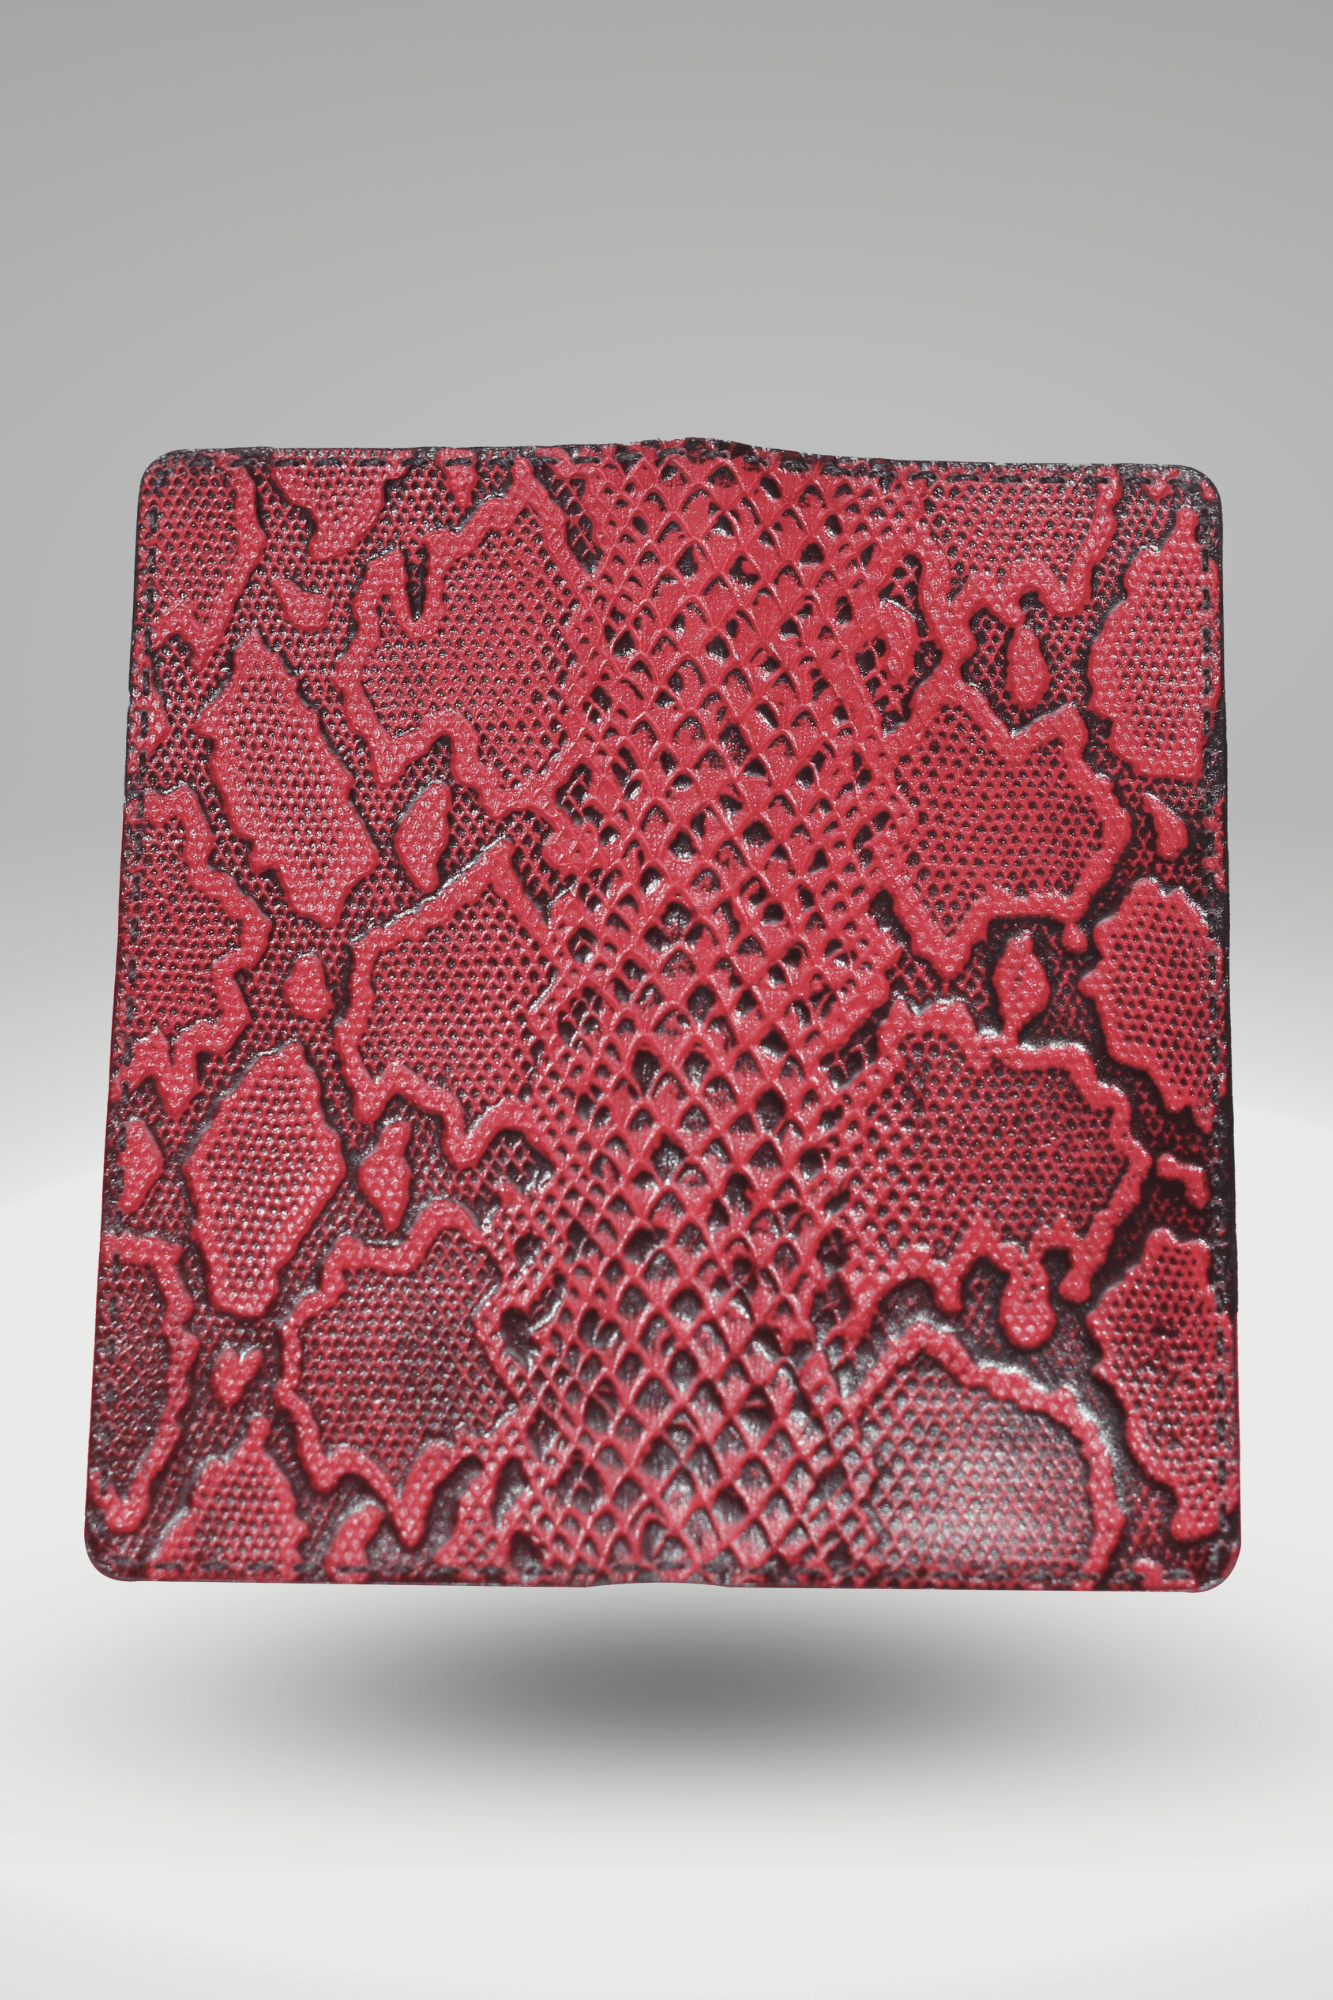 Unisex Genuine Leather Wallet With Black Hand-Tipped Maroon Python Textured Finish